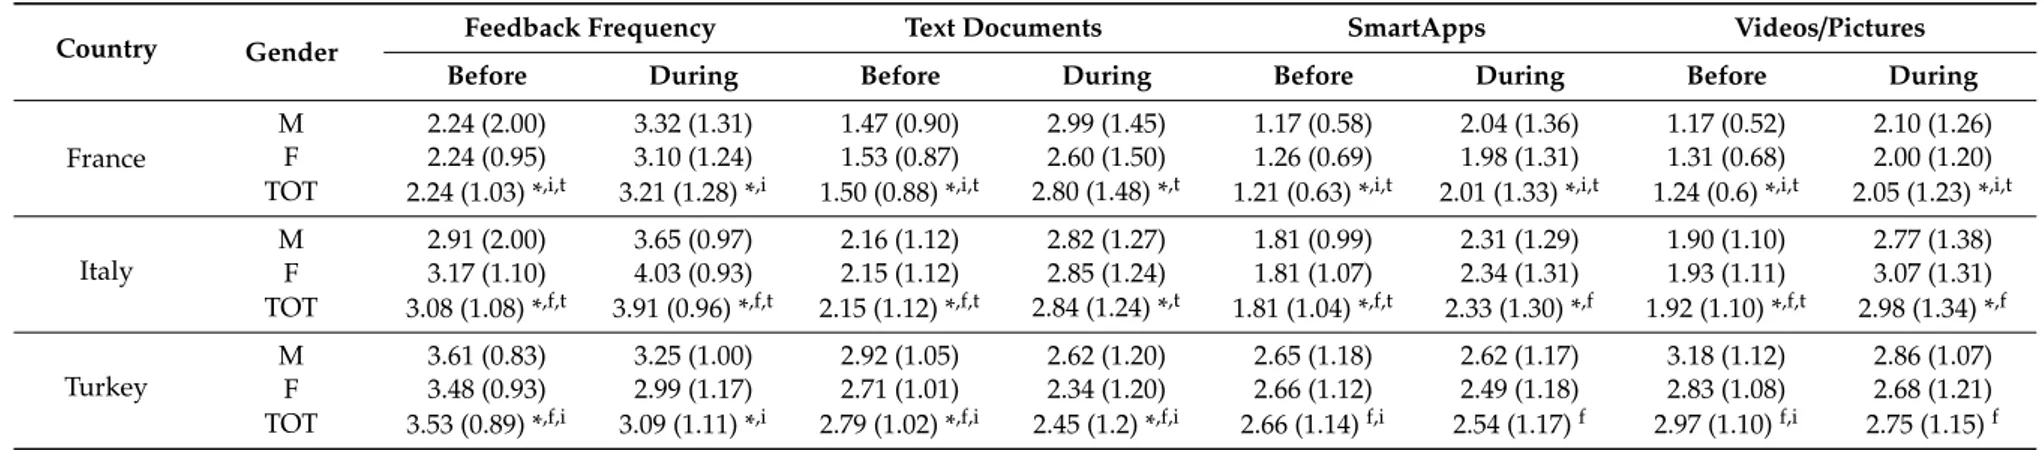 Table 4. Descriptive statistic and Bonferroni post-hoc pairwise comparisons of the interaction time × country in feedback frequency and its different formats.